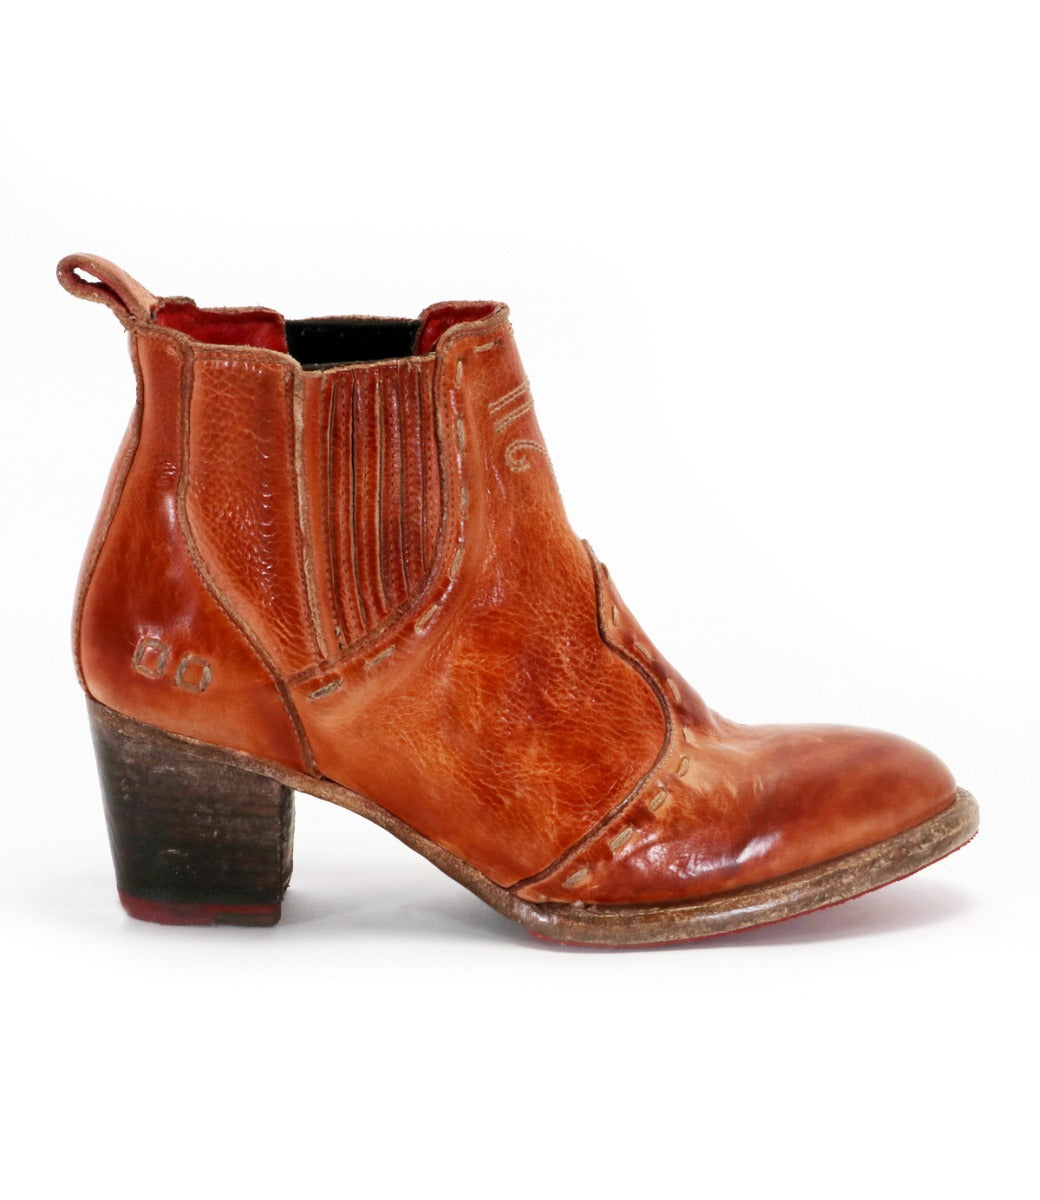 A Bed Stu Brie II women's ankle boot in tan leather.